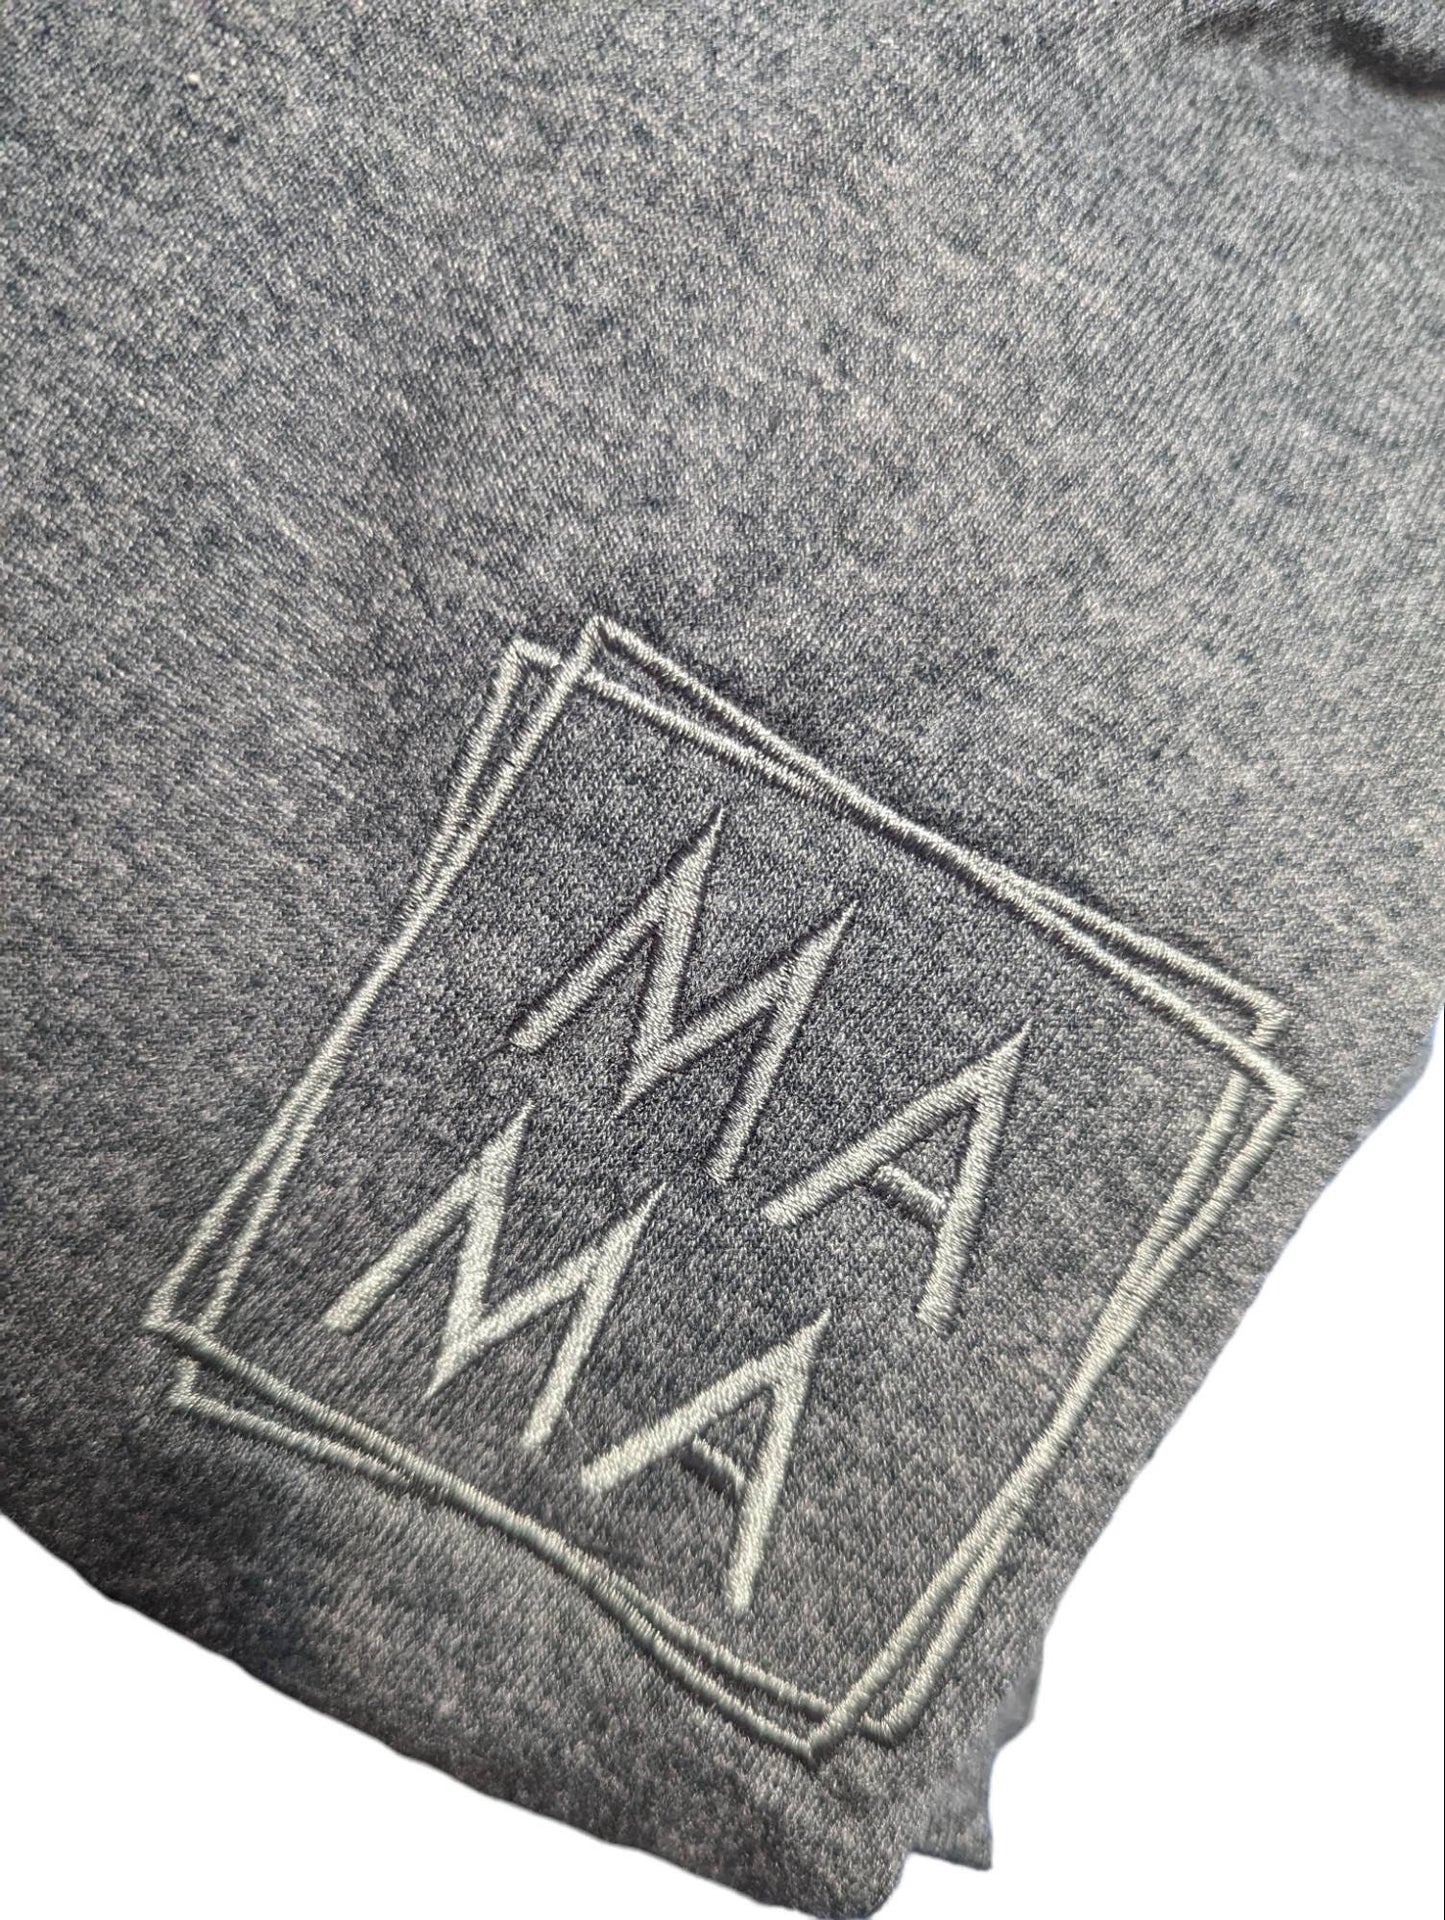 Minimalist mama embroidered T shirt. 100% cotton, mother's day gift